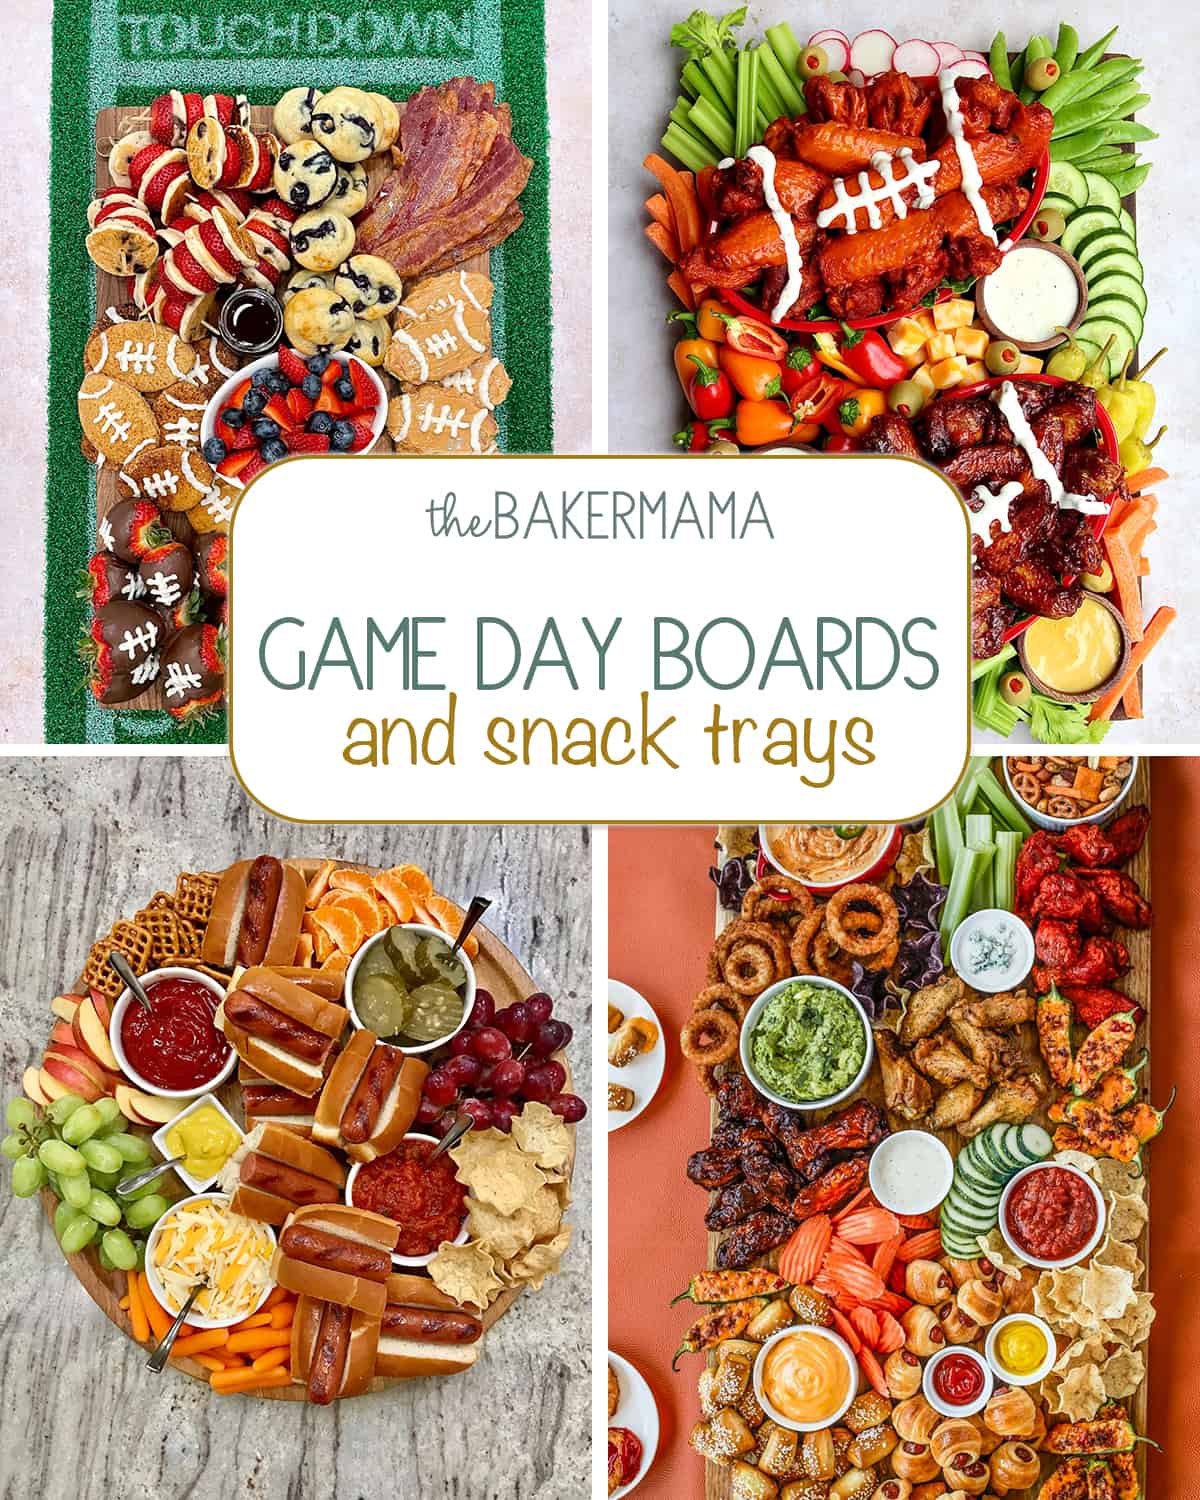 Gameday boards and snack trays.